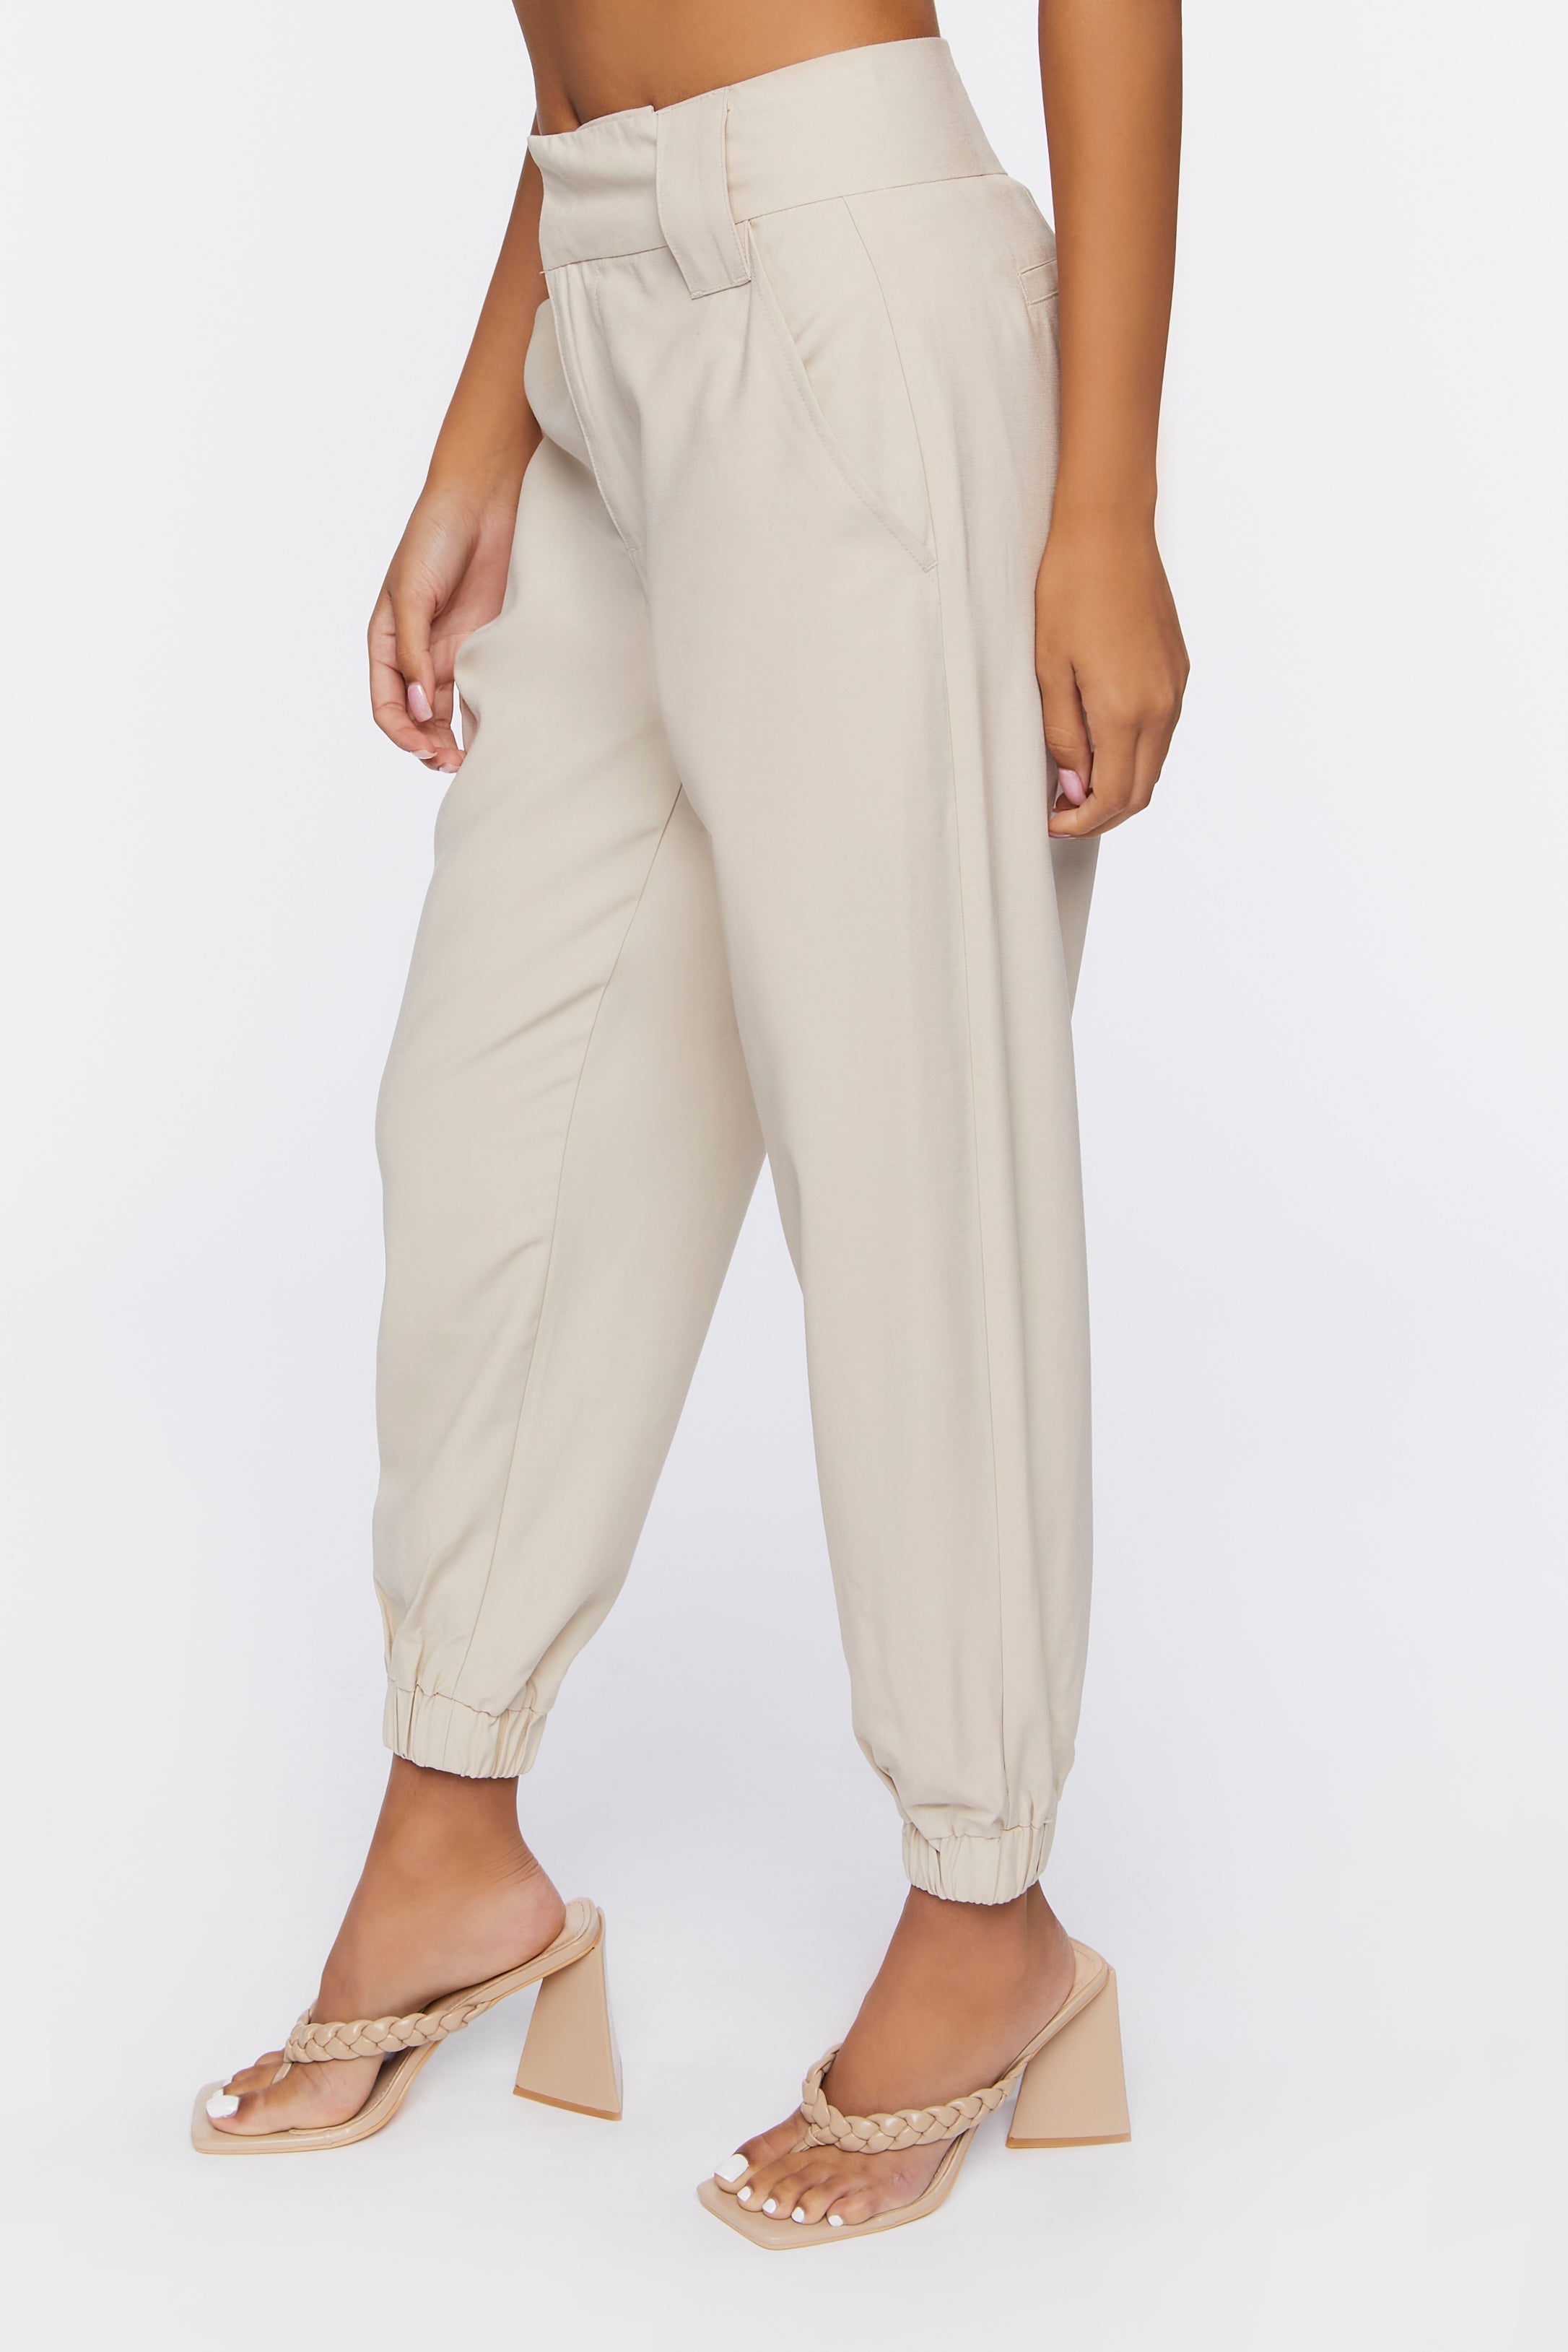 Ashbrown Mid-Rise Ankle Pants 2